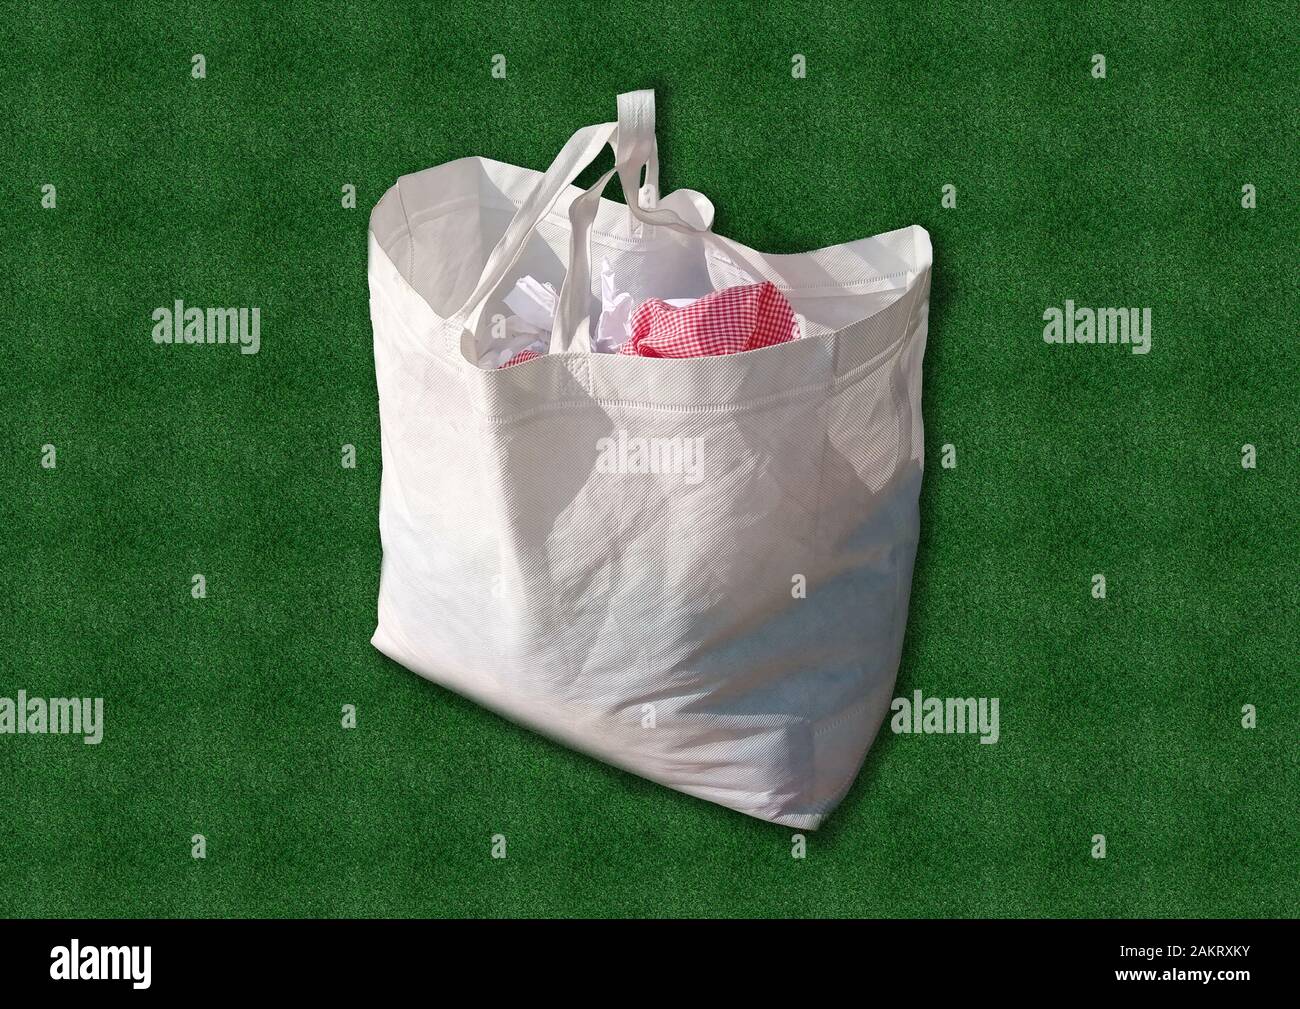 White fabric cloth Recyclable ECO Bag on Green Grass background. Replacement plastic bag. Save Earth ecology. Non Woven Bag Good for the Environment. Stock Photo